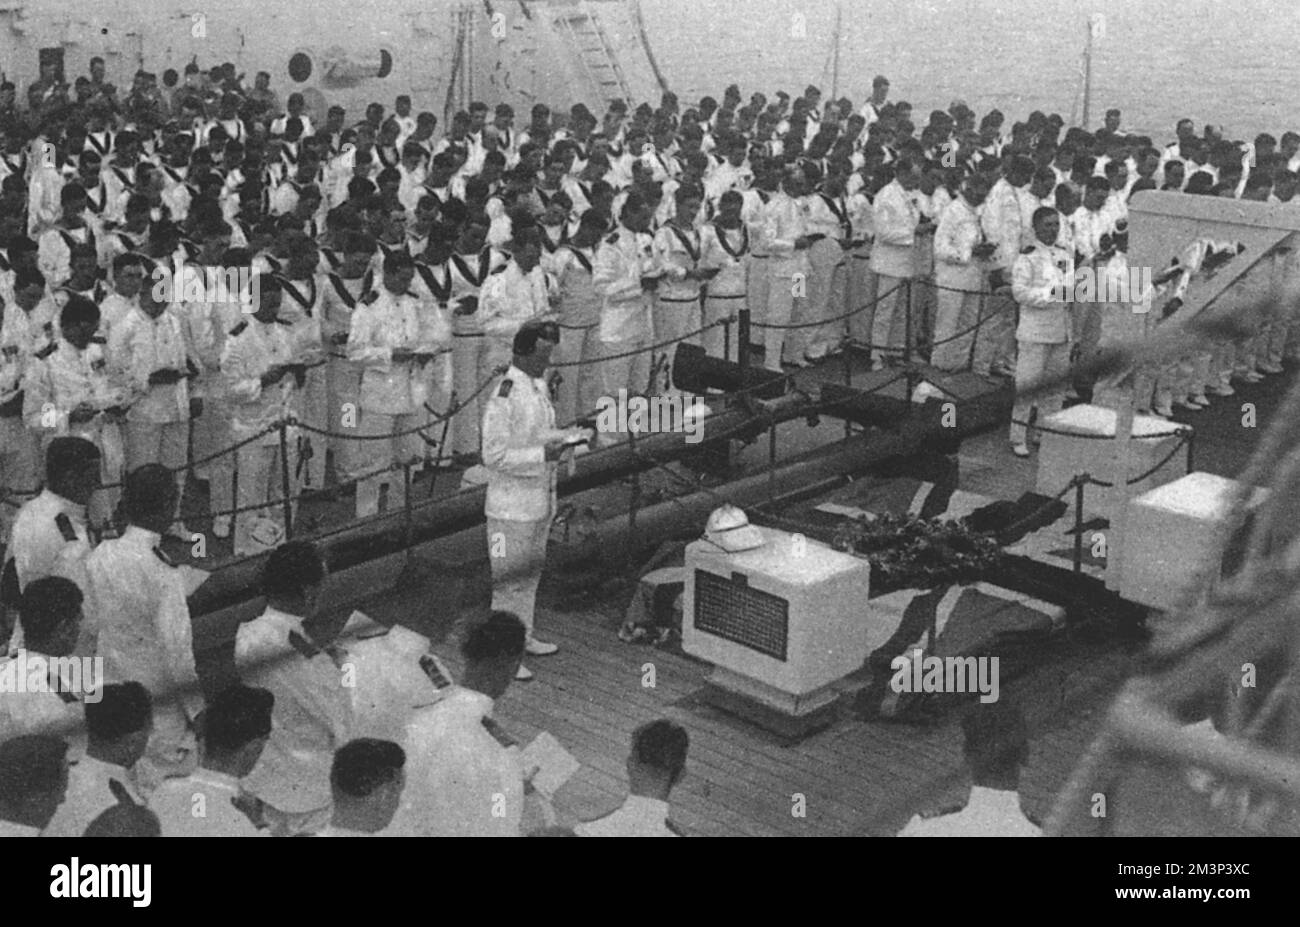 The loss of British submarine HMS Poseidon on 9th June 1931 after colliding with the Chinese merchant steamer SS Yuta : the memorial service aboard HMS Medway at Weihai (Poseidon's base in China) - survivors of the disaster in the first two ranks facing the camera.     Date: 1931 Stock Photo